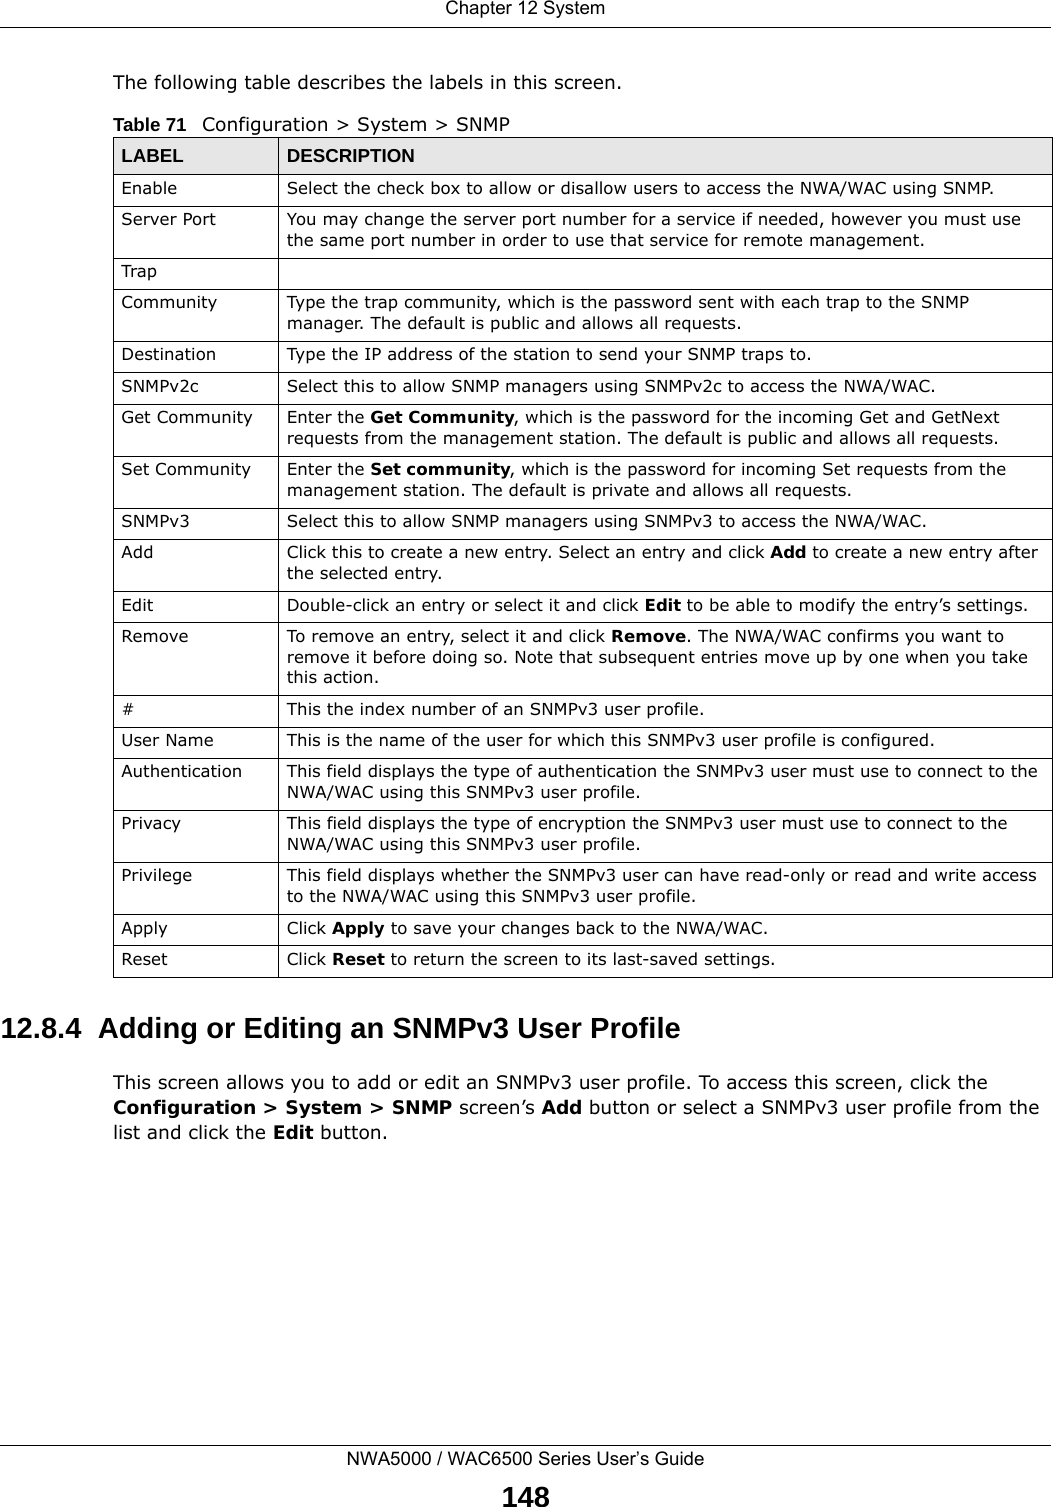 Chapter 12 SystemNWA5000 / WAC6500 Series User’s Guide148The following table describes the labels in this screen.  12.8.4  Adding or Editing an SNMPv3 User ProfileThis screen allows you to add or edit an SNMPv3 user profile. To access this screen, click the Configuration &gt; System &gt; SNMP screen’s Add button or select a SNMPv3 user profile from the list and click the Edit button.Table 71   Configuration &gt; System &gt; SNMPLABEL DESCRIPTIONEnable Select the check box to allow or disallow users to access the NWA/WAC using SNMP.Server Port You may change the server port number for a service if needed, however you must use the same port number in order to use that service for remote management.TrapCommunity Type the trap community, which is the password sent with each trap to the SNMP manager. The default is public and allows all requests.Destination Type the IP address of the station to send your SNMP traps to.SNMPv2c Select this to allow SNMP managers using SNMPv2c to access the NWA/WAC.Get Community Enter the Get Community, which is the password for the incoming Get and GetNext requests from the management station. The default is public and allows all requests.Set Community Enter the Set community, which is the password for incoming Set requests from the management station. The default is private and allows all requests.SNMPv3 Select this to allow SNMP managers using SNMPv3 to access the NWA/WAC.Add Click this to create a new entry. Select an entry and click Add to create a new entry after the selected entry.Edit Double-click an entry or select it and click Edit to be able to modify the entry’s settings. Remove To remove an entry, select it and click Remove. The NWA/WAC confirms you want to remove it before doing so. Note that subsequent entries move up by one when you take this action.#This the index number of an SNMPv3 user profile.User Name This is the name of the user for which this SNMPv3 user profile is configured.Authentication This field displays the type of authentication the SNMPv3 user must use to connect to the NWA/WAC using this SNMPv3 user profile.Privacy This field displays the type of encryption the SNMPv3 user must use to connect to the NWA/WAC using this SNMPv3 user profile.Privilege This field displays whether the SNMPv3 user can have read-only or read and write access to the NWA/WAC using this SNMPv3 user profile.Apply Click Apply to save your changes back to the NWA/WAC. Reset Click Reset to return the screen to its last-saved settings. 